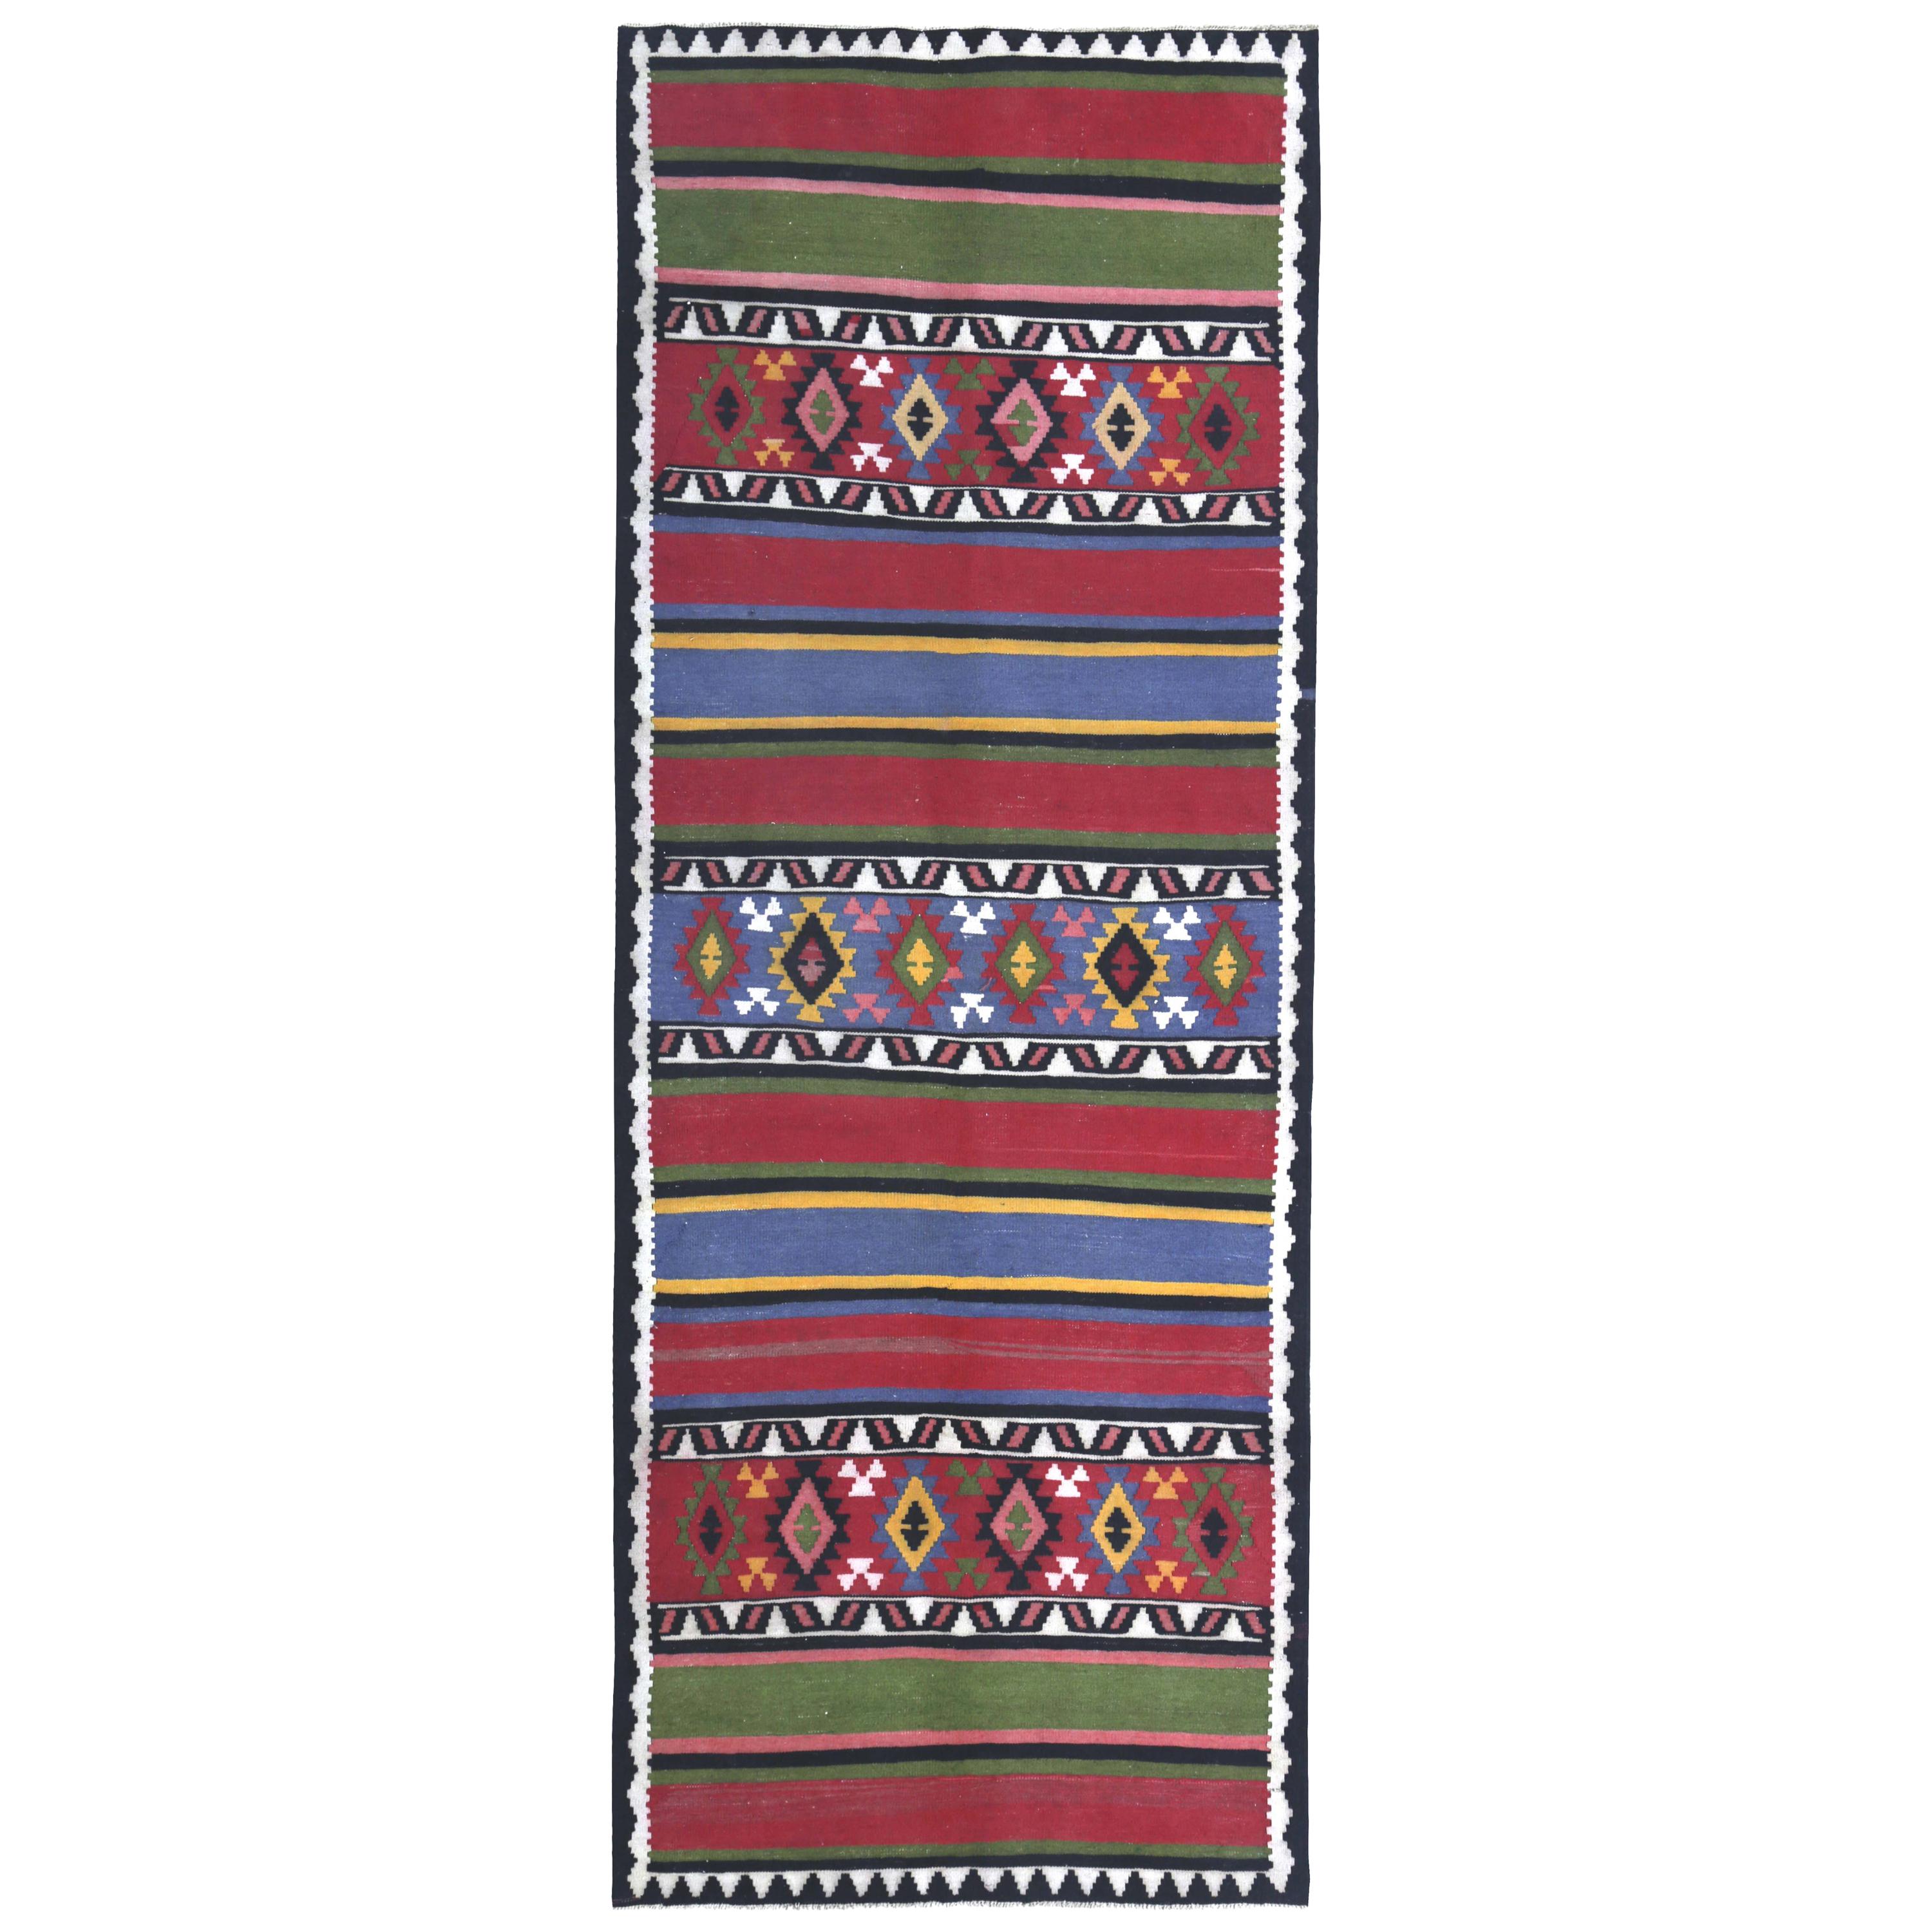 Modern Turkish Kilim Runner Rug in Red, Green & Blue Stripes with Tribal Design For Sale